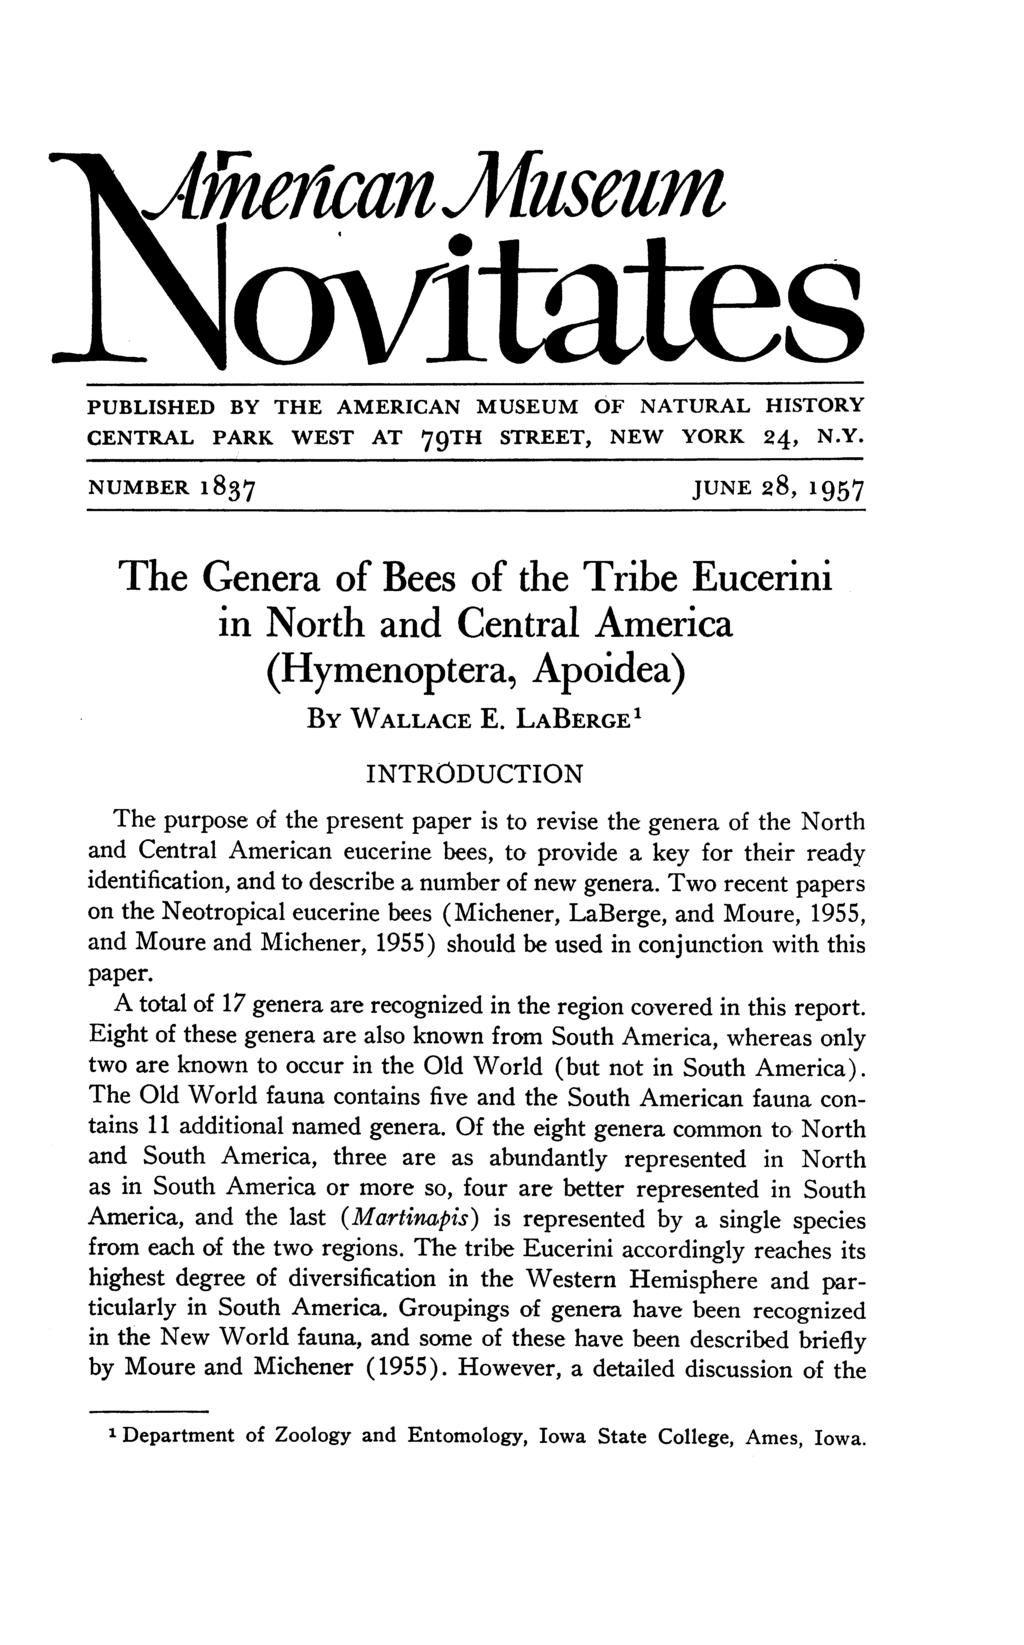 \ai1a?eian Mllsdllm ovitates PUBLISHED BY THE AMERICAN MUSEUM OF NATURAL HISTORY CENTRAL PARK WEST AT 79TH STREET, NEW YORK 24, N.Y. NUMBER 1837 JUNE 28, 1957 The Genera of Bees of the Tribe Eucerini in North and Central America (Hymenoptera, Apoidea) BY WALLACE E.